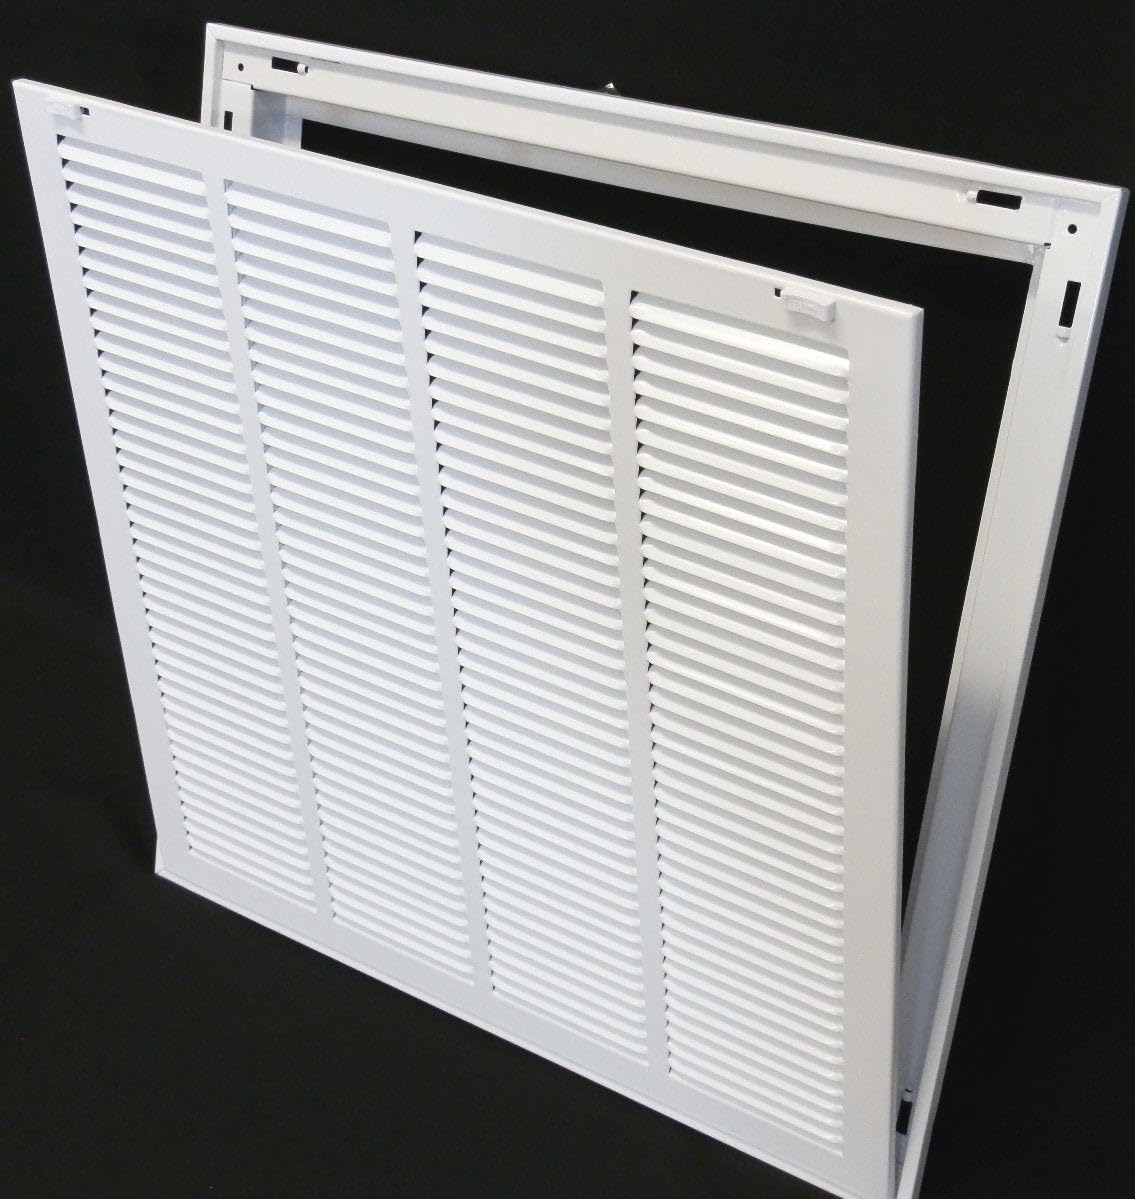 20&quot; X 18&quot; Steel Return Air Filter Grille for 1&quot; Filter - Removable Frame - [Outer Dimensions: 22 5/8&quot; X 20 5/8&quot;]